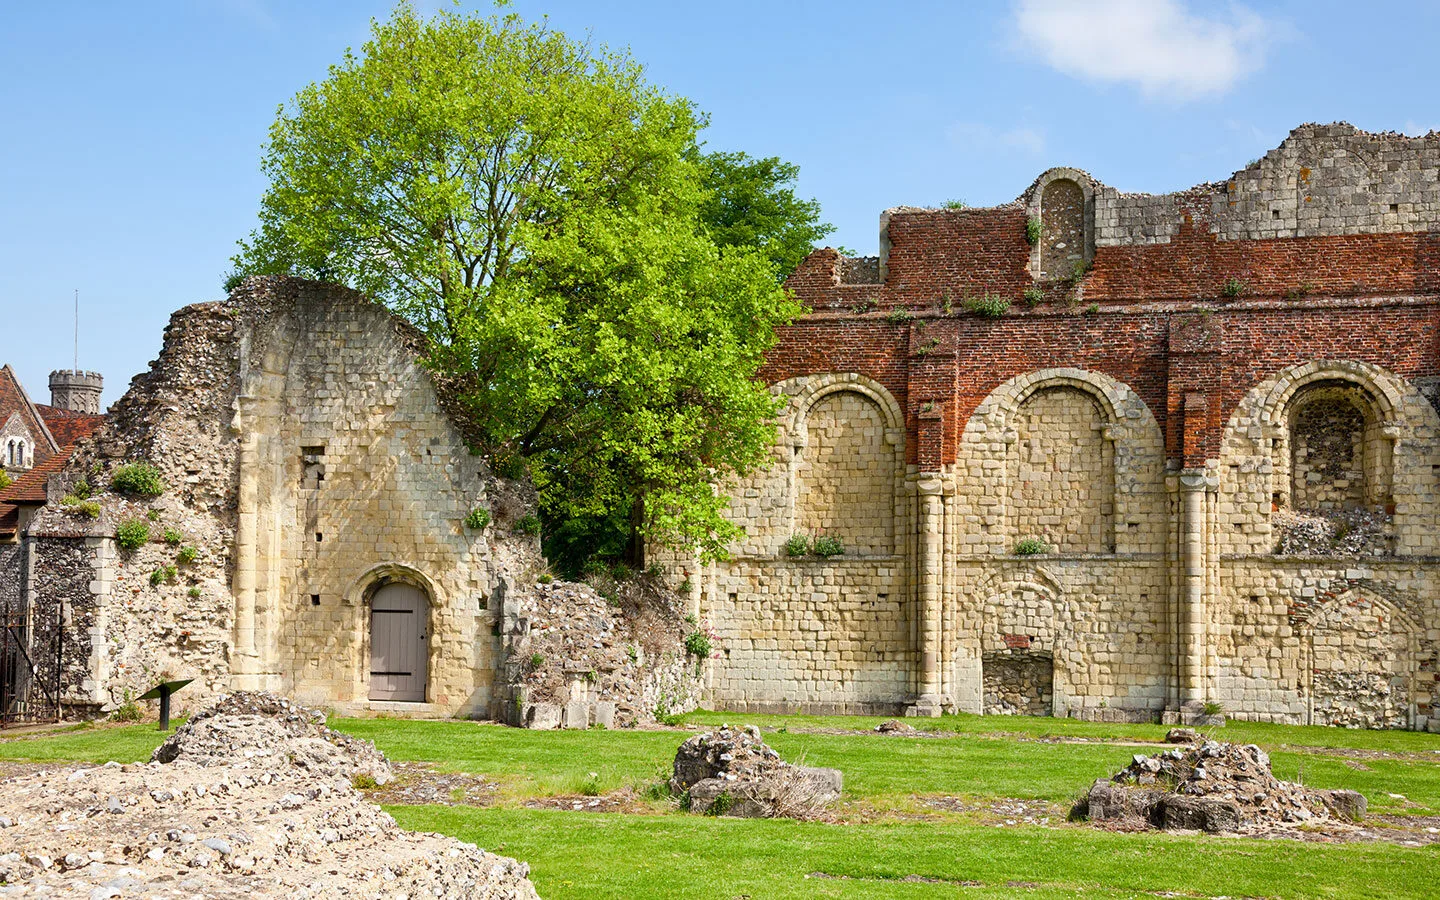 The ruins of St Augustine's Abbey